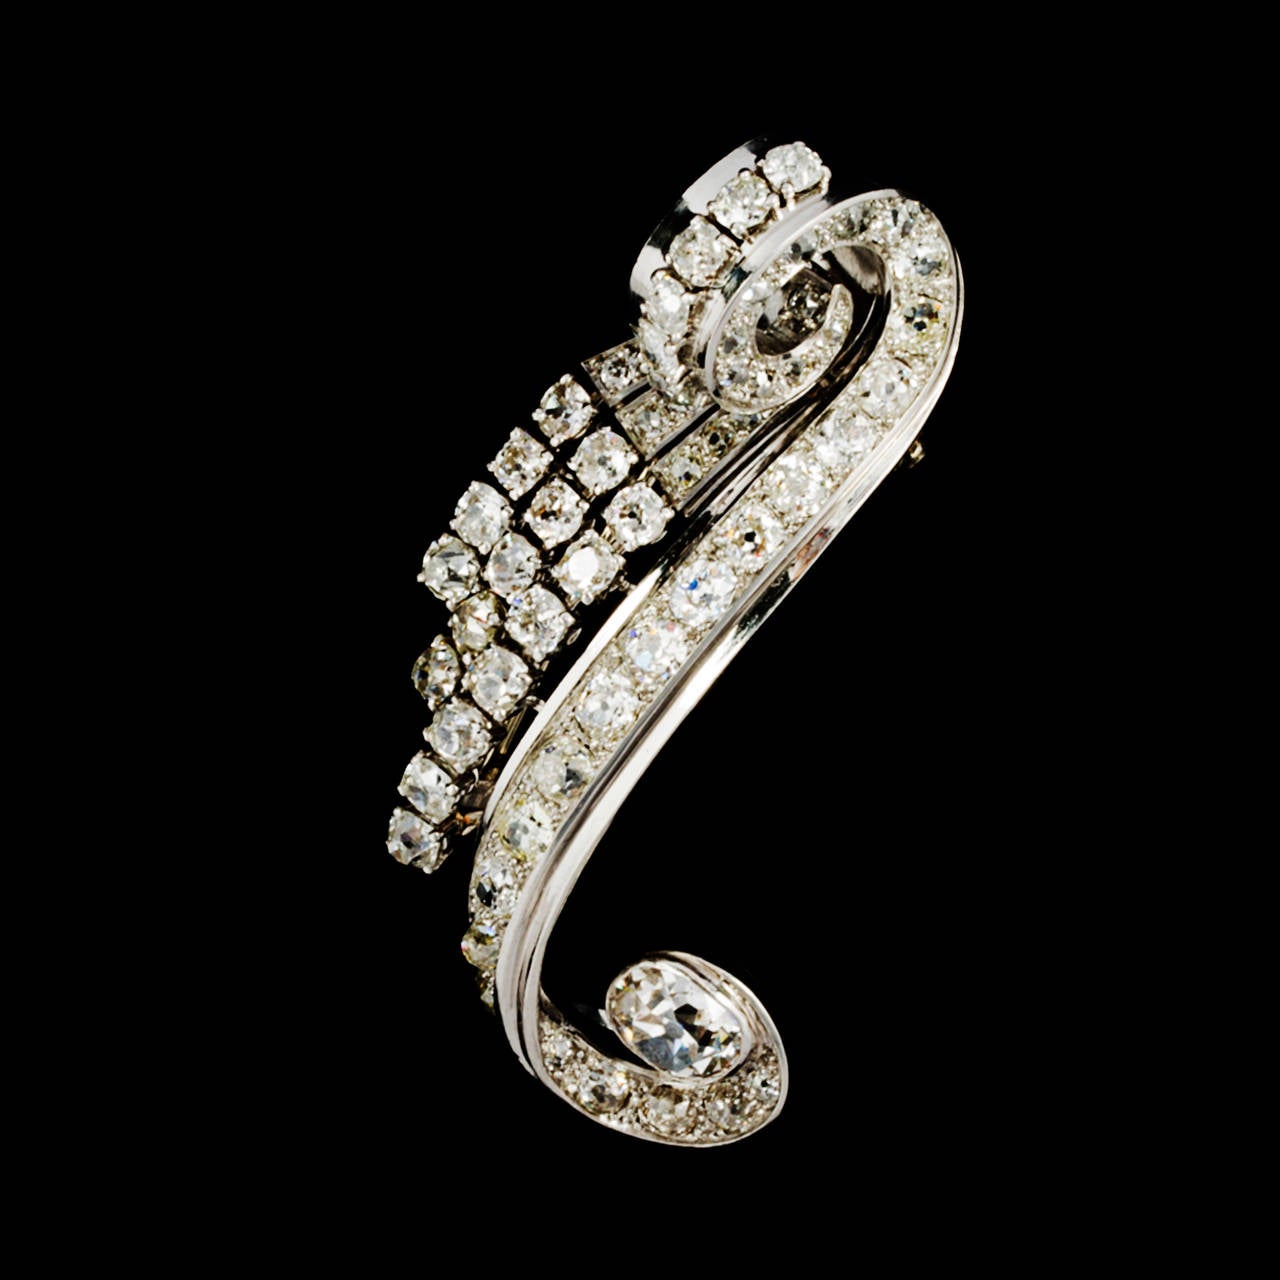 (950°/oo) platinum and 18ct (750°/oo) white gold Dress clip brooch ornated with a scrolling band set with old-mine cut diamonds and ended by a cushion shape diamond approximately weighing 1.80ct. 

Three lines of graduated old-mine cut diamonds on